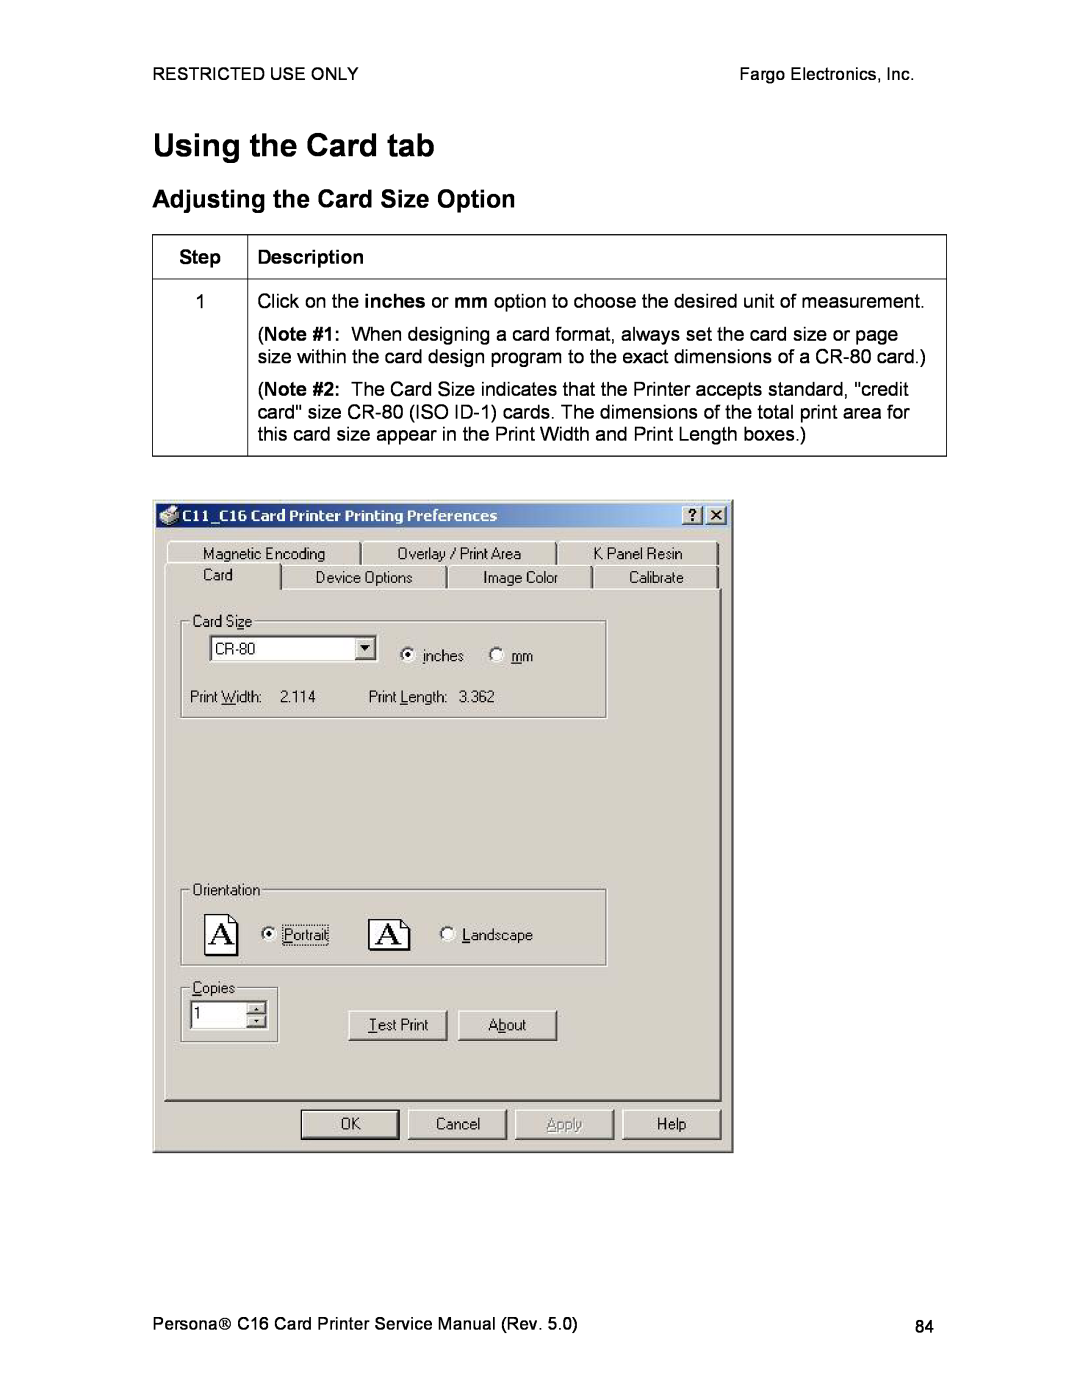 FARGO electronic C16 service manual Using the Card tab, Adjusting the Card Size Option 